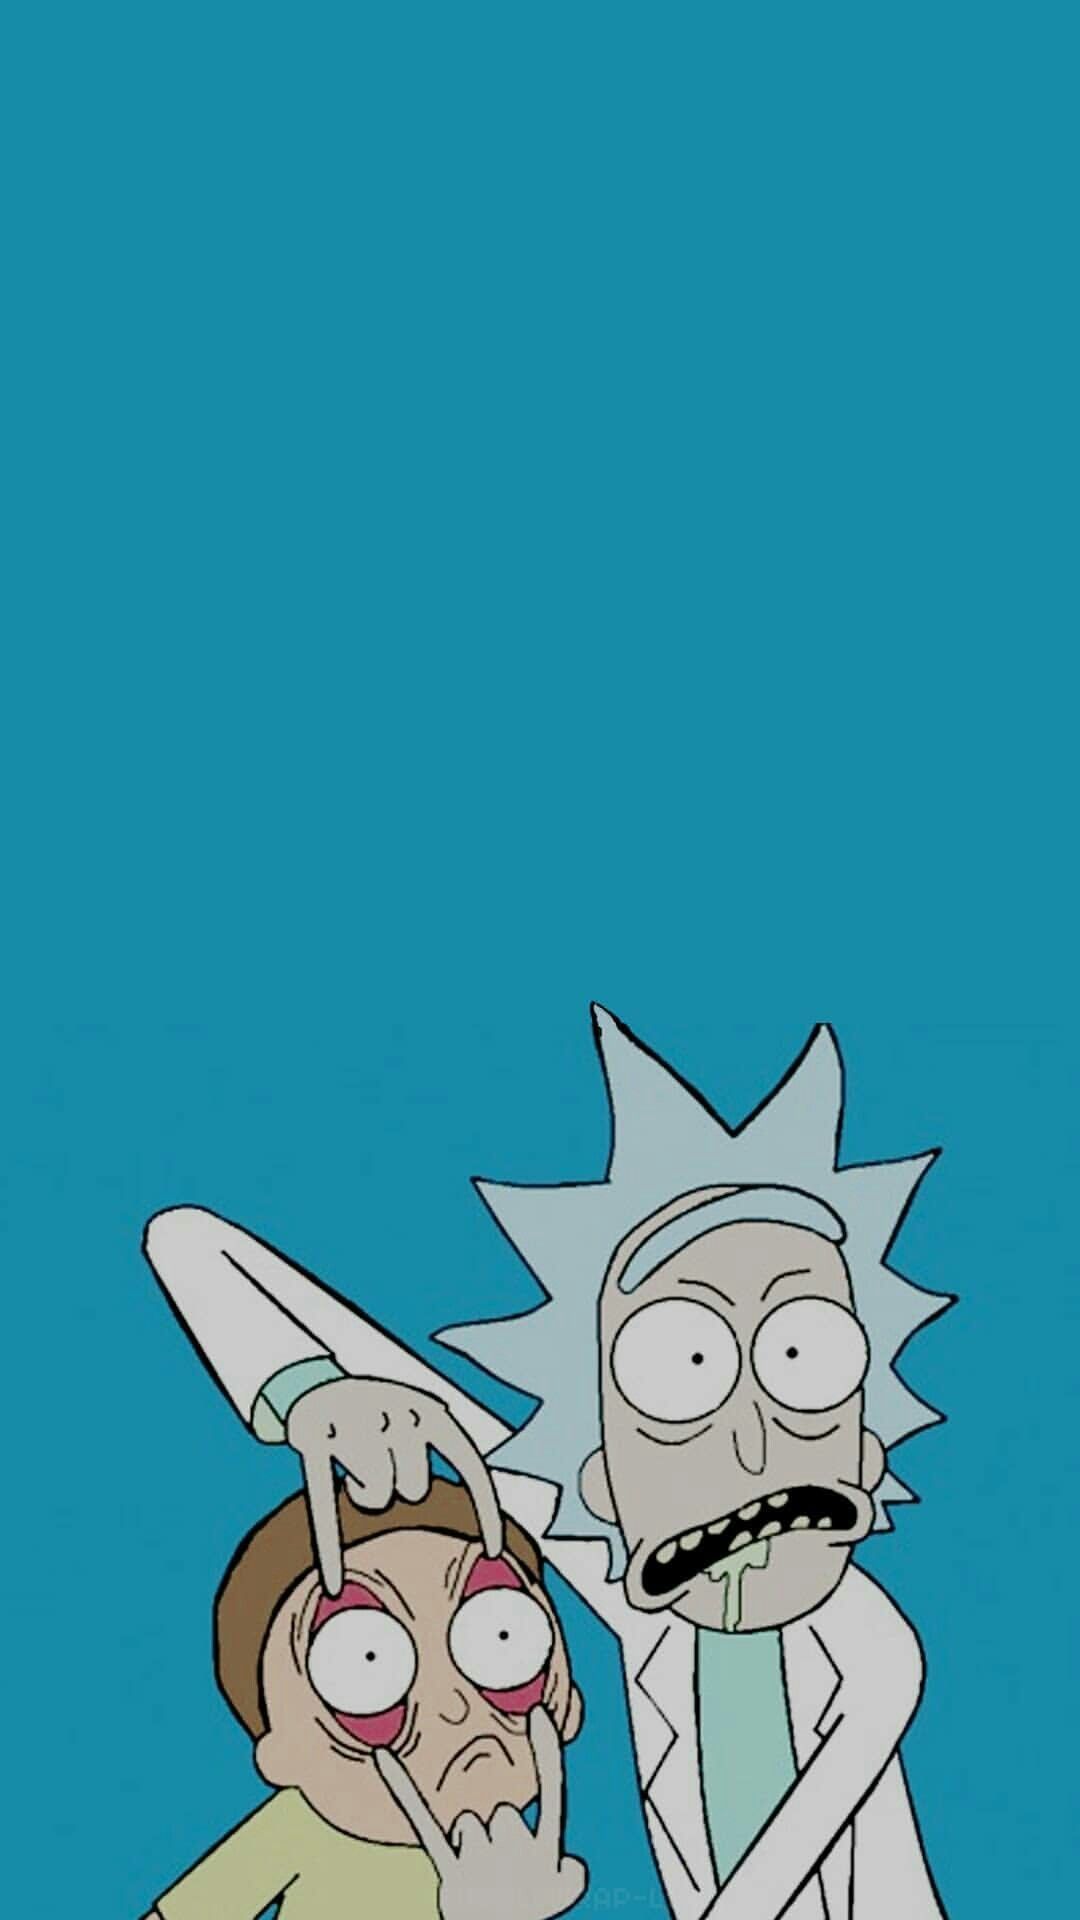 Aesthetic Rick And Morty Wallpaper Ios in 2020